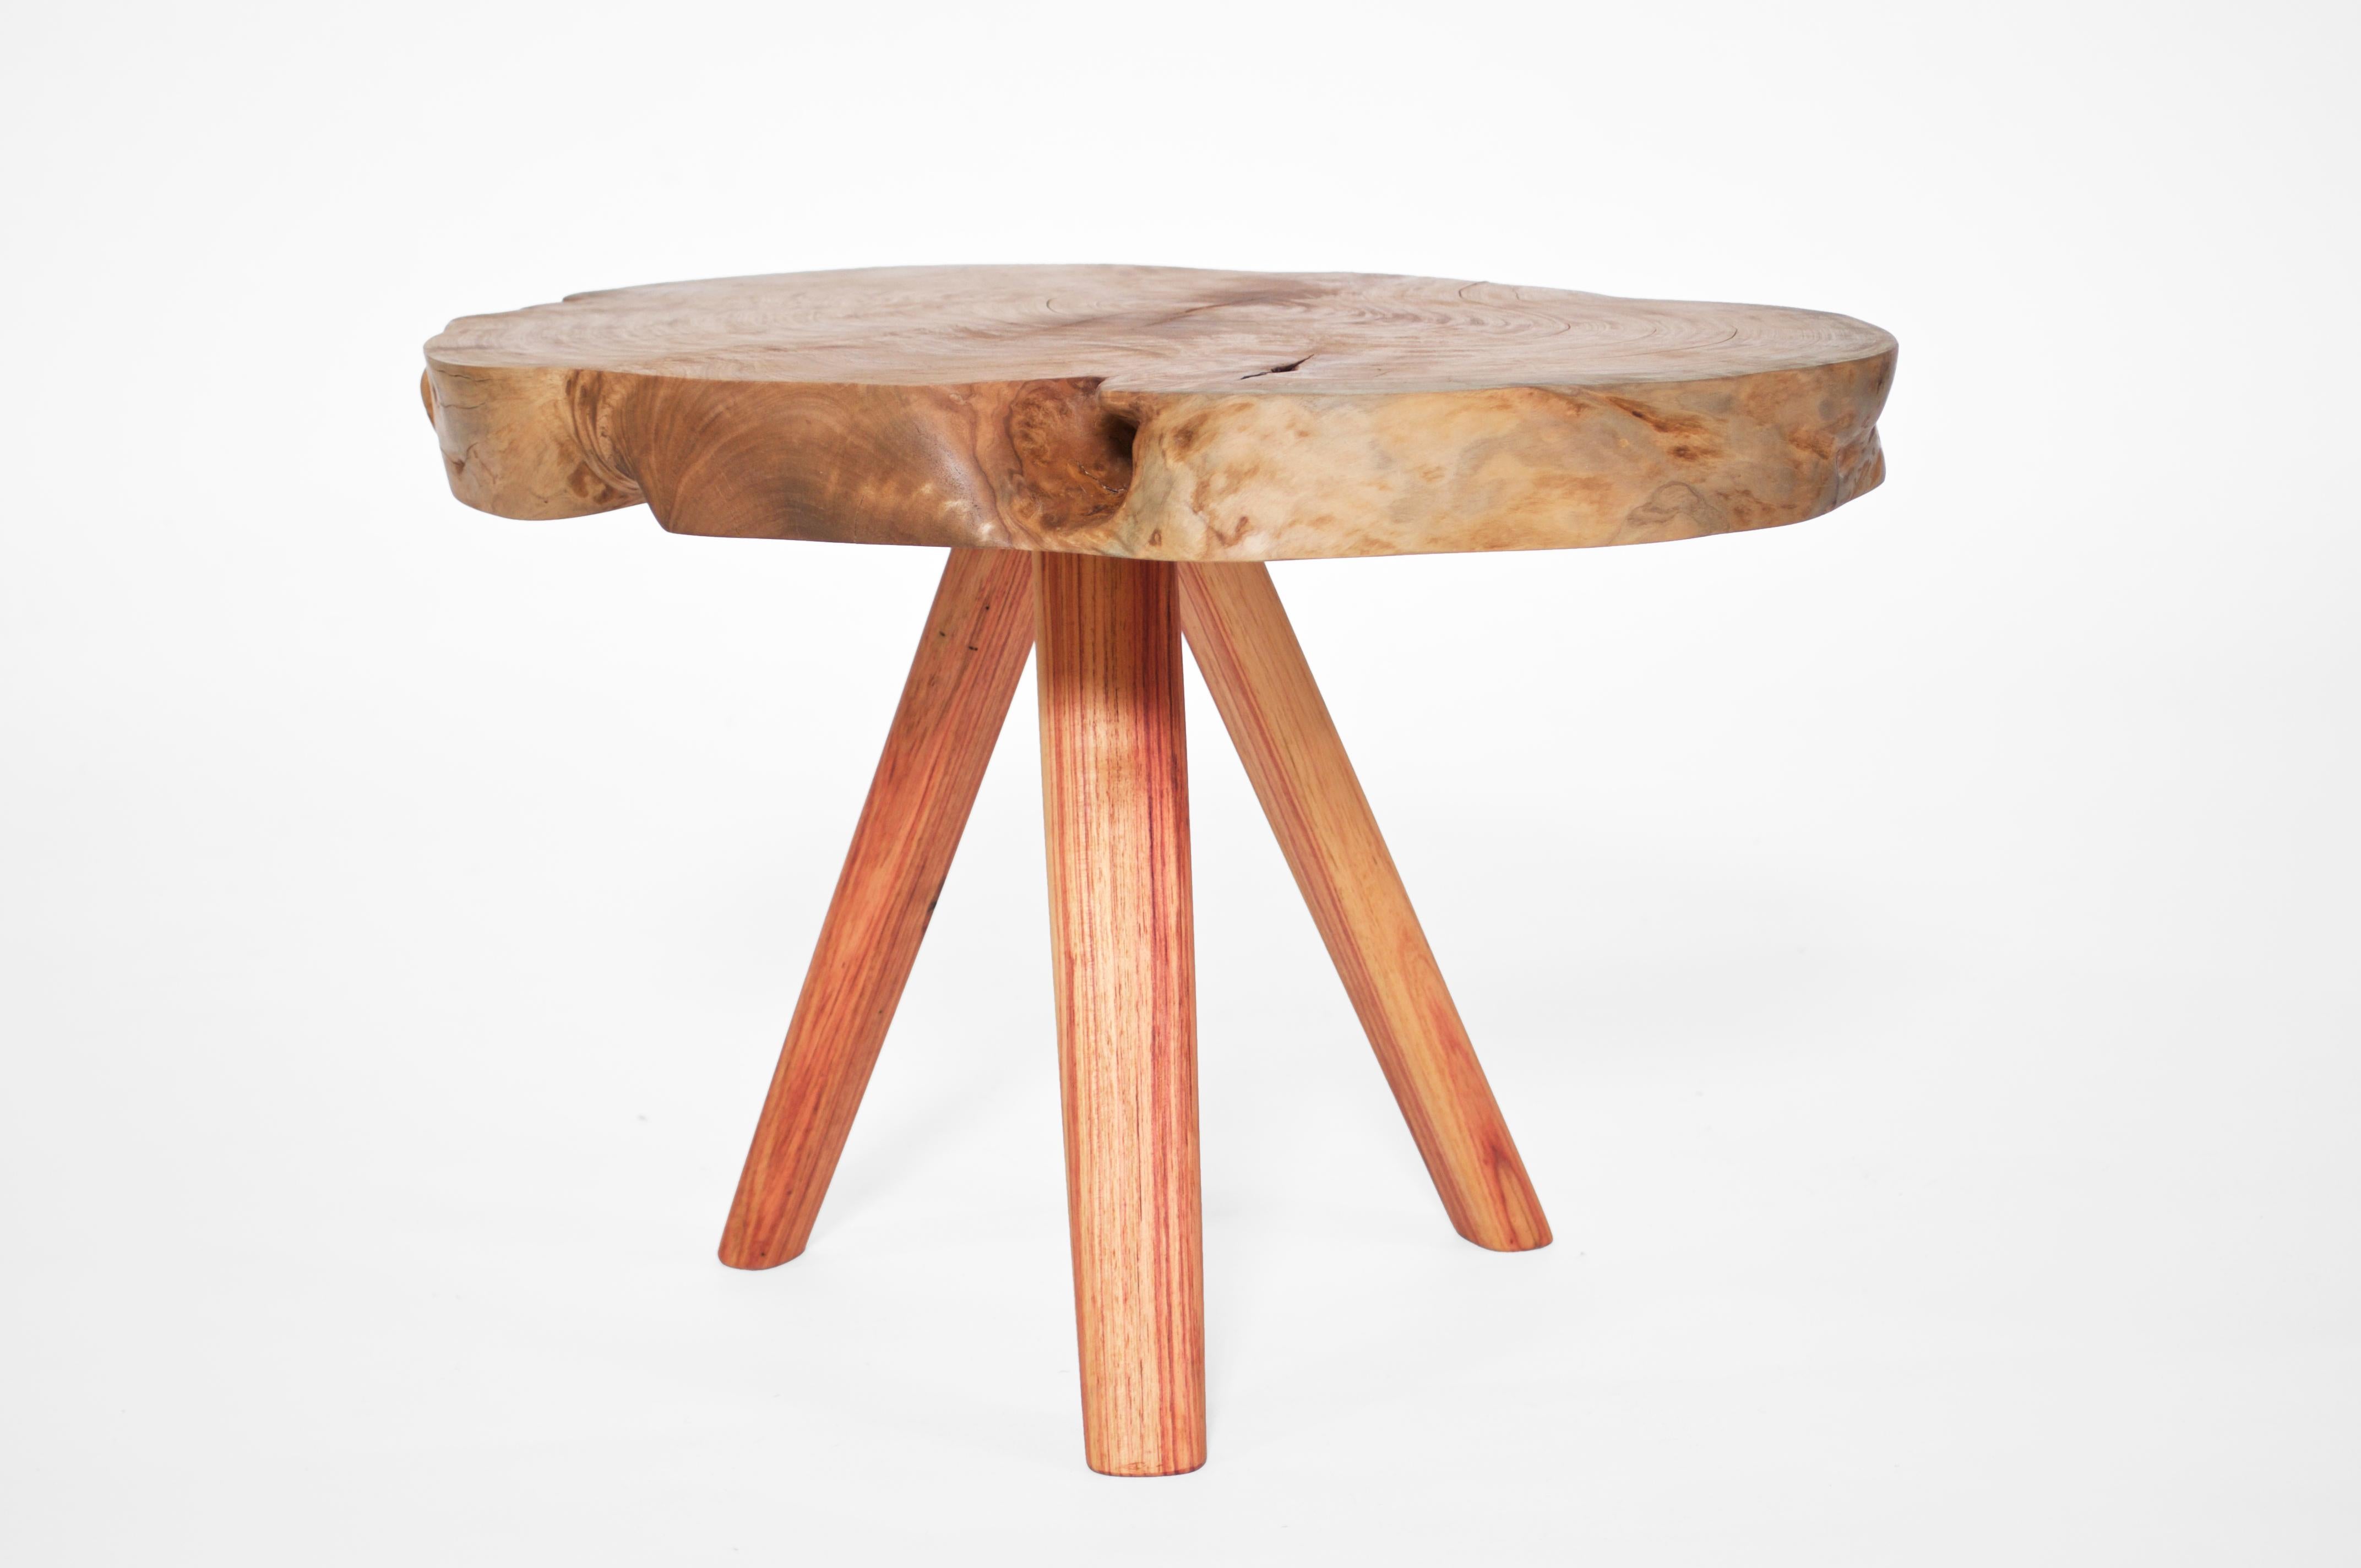 Unique signed table by Jörg Pietschmann
Materials: Lagerstromie, Rosewood, Polished oil finish
Measures: H 33 x W 49 x 38 cm

In Pietschmann’s sculptures, trees that for centuries were part of a landscape and founded in primordial forces tell